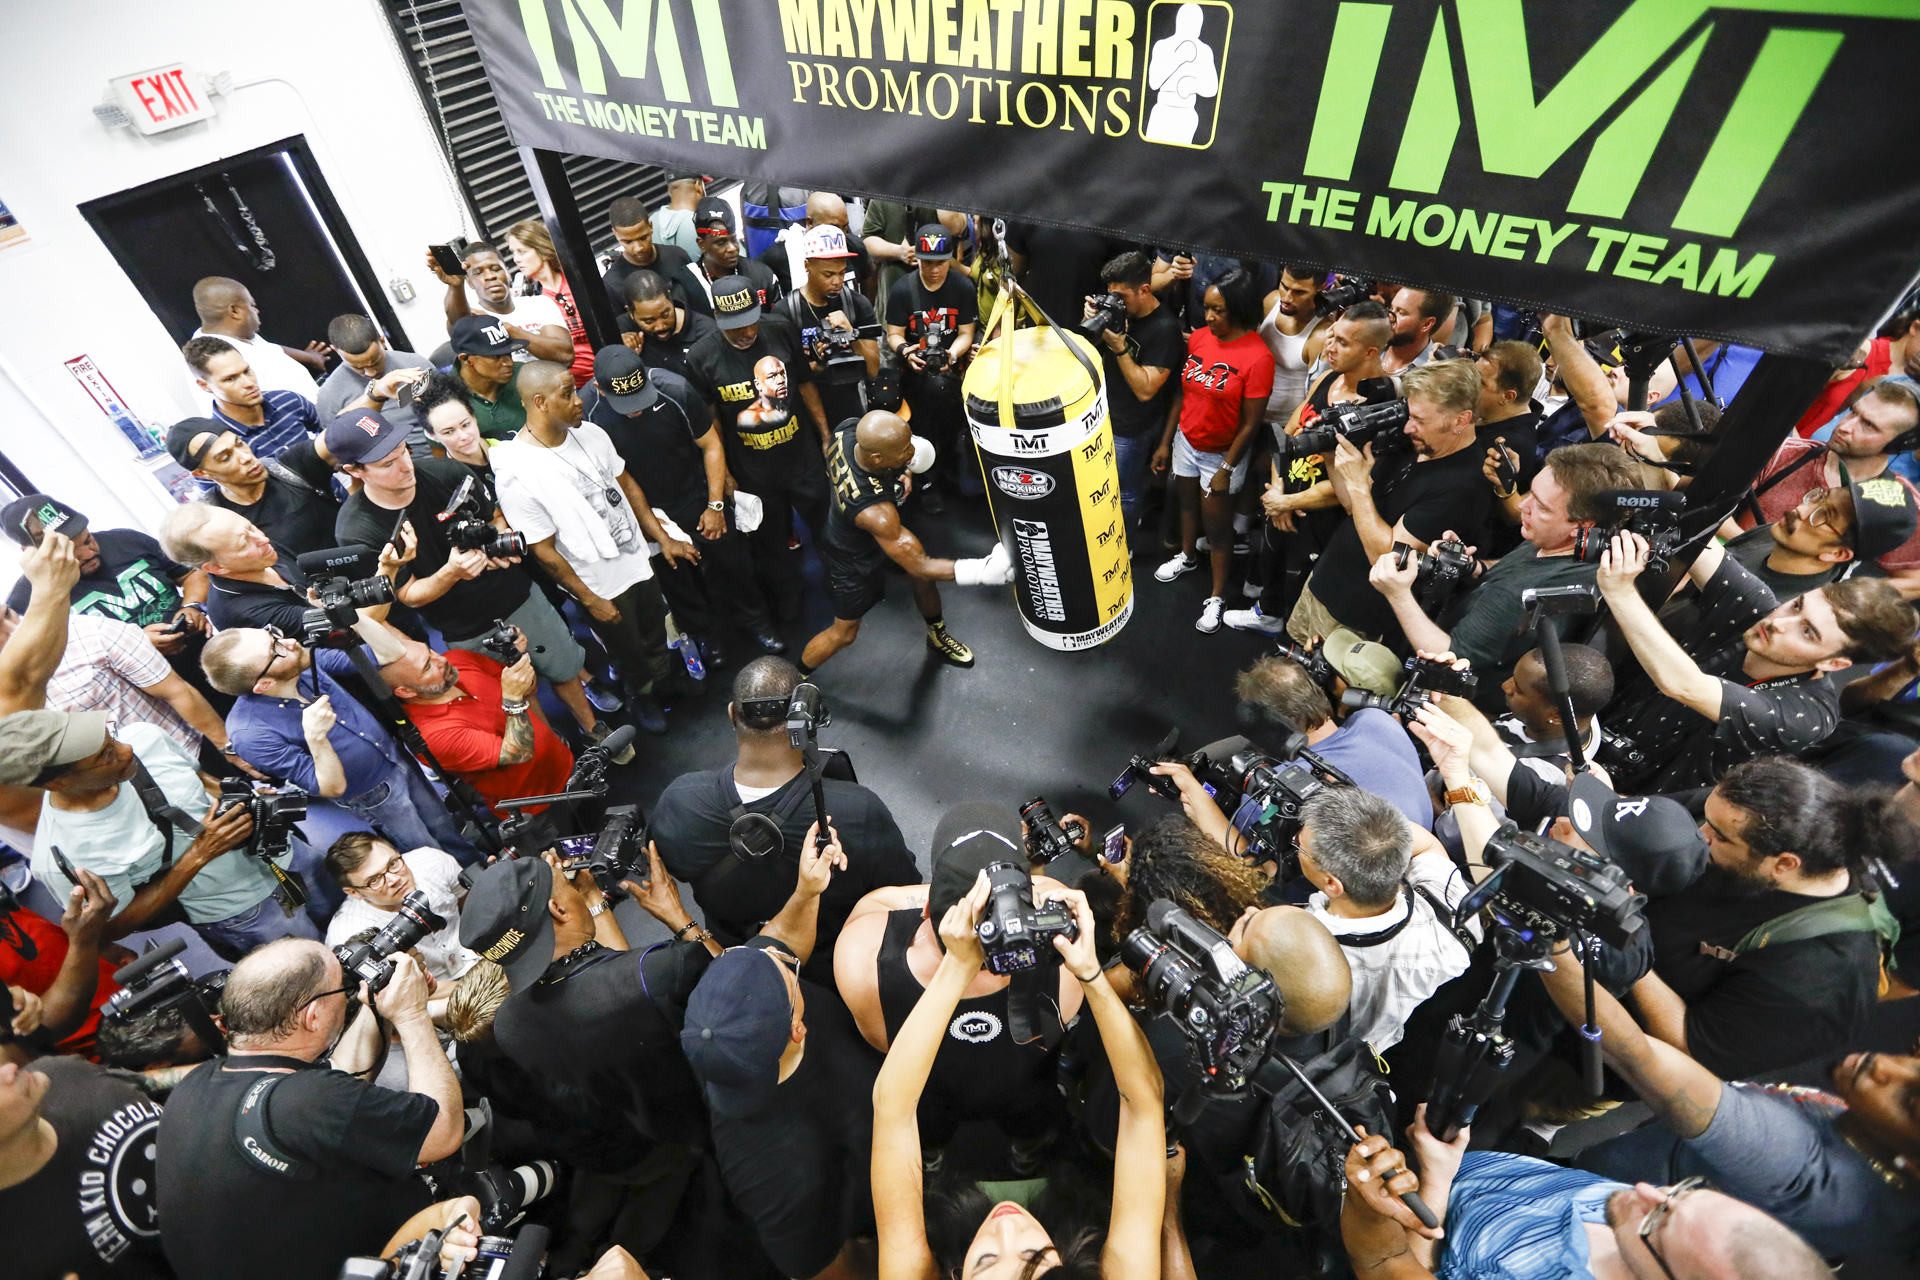 1920x1280 Floyd Mayweather had a packed house Thursday. Esther Lin, Showtime